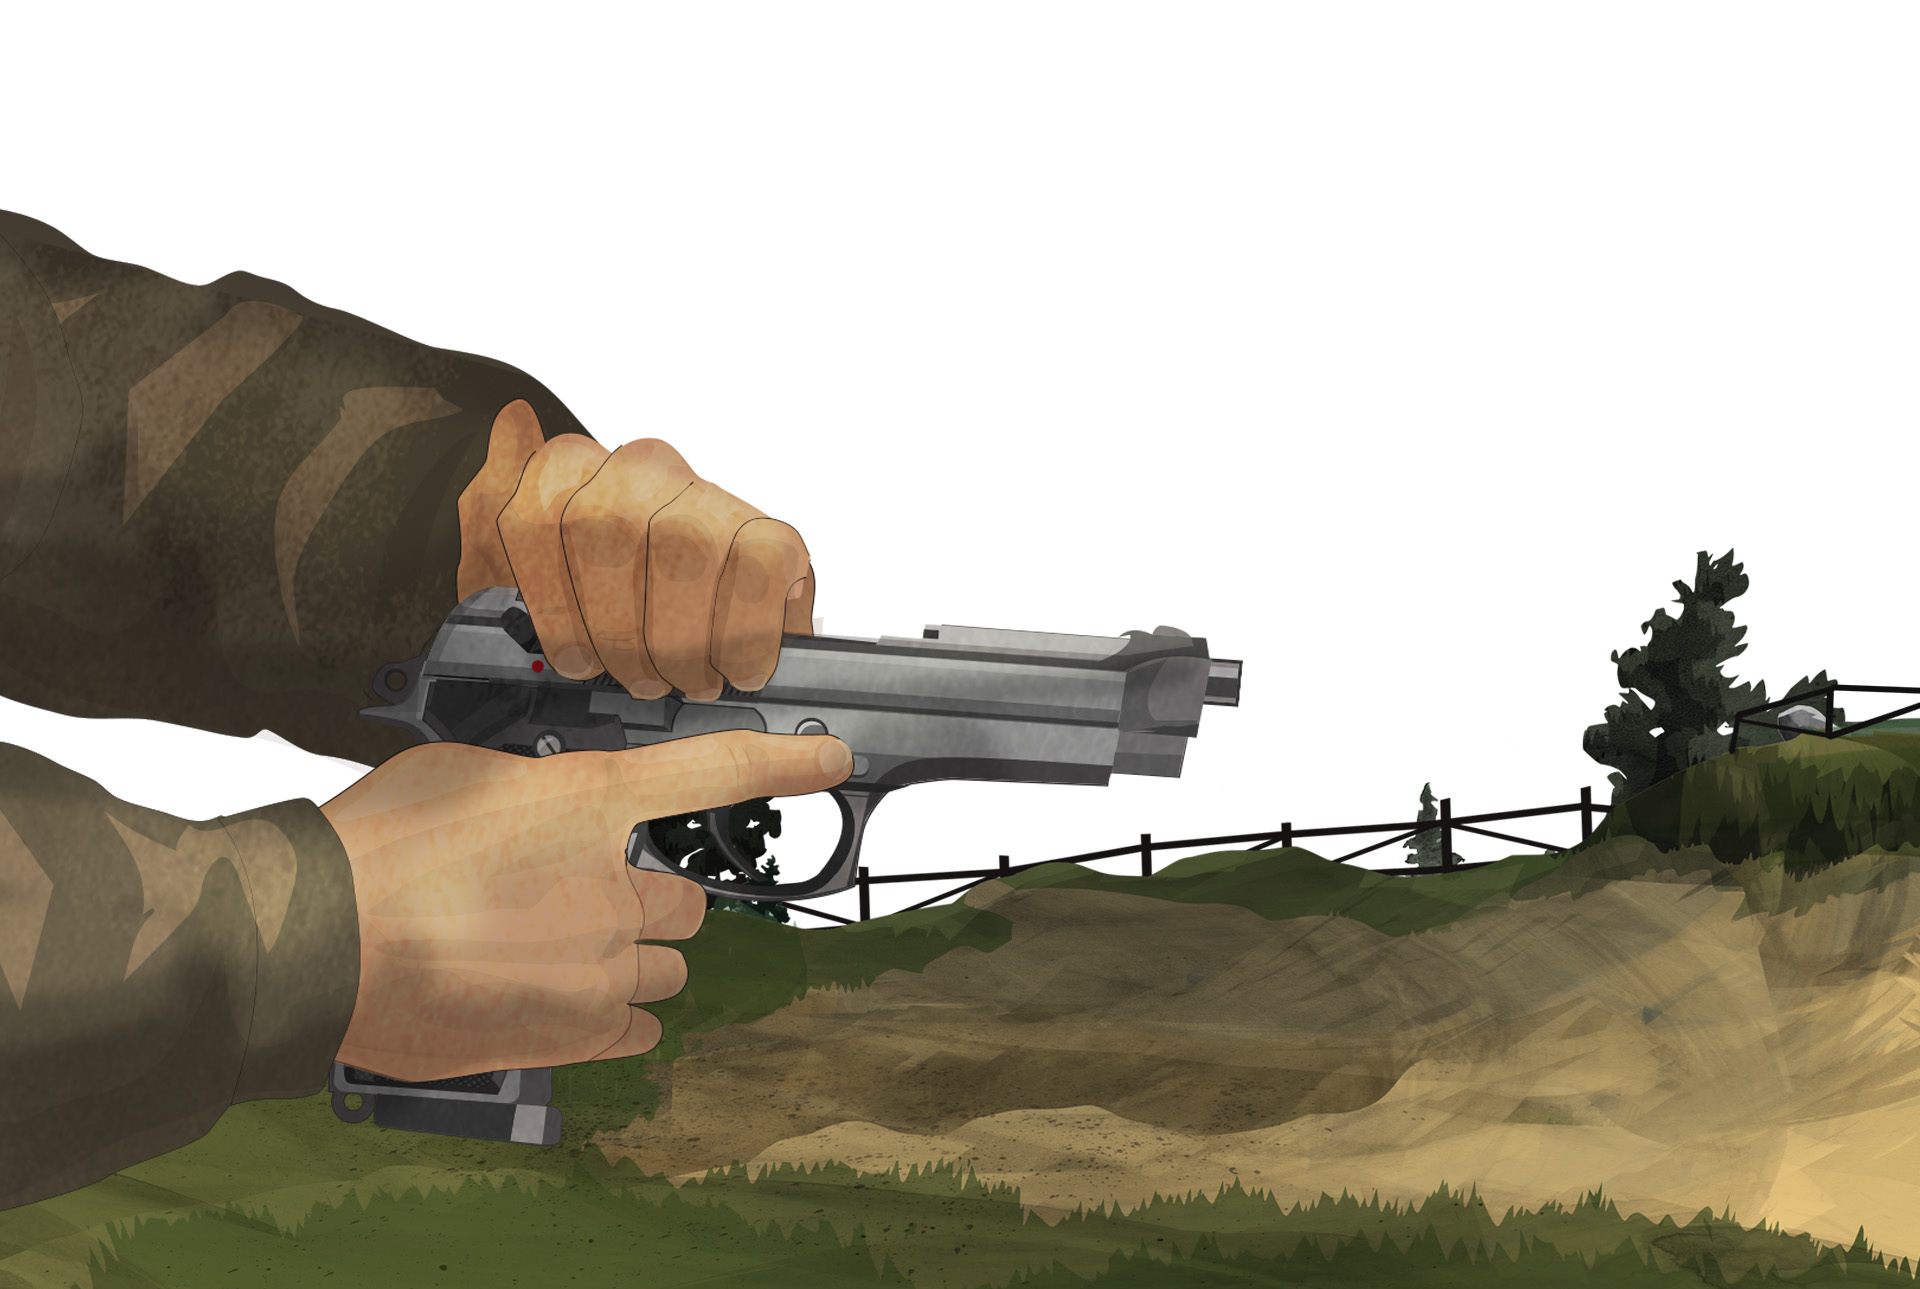 Illustration of a man in a two handed handgun stance at a shooting range.